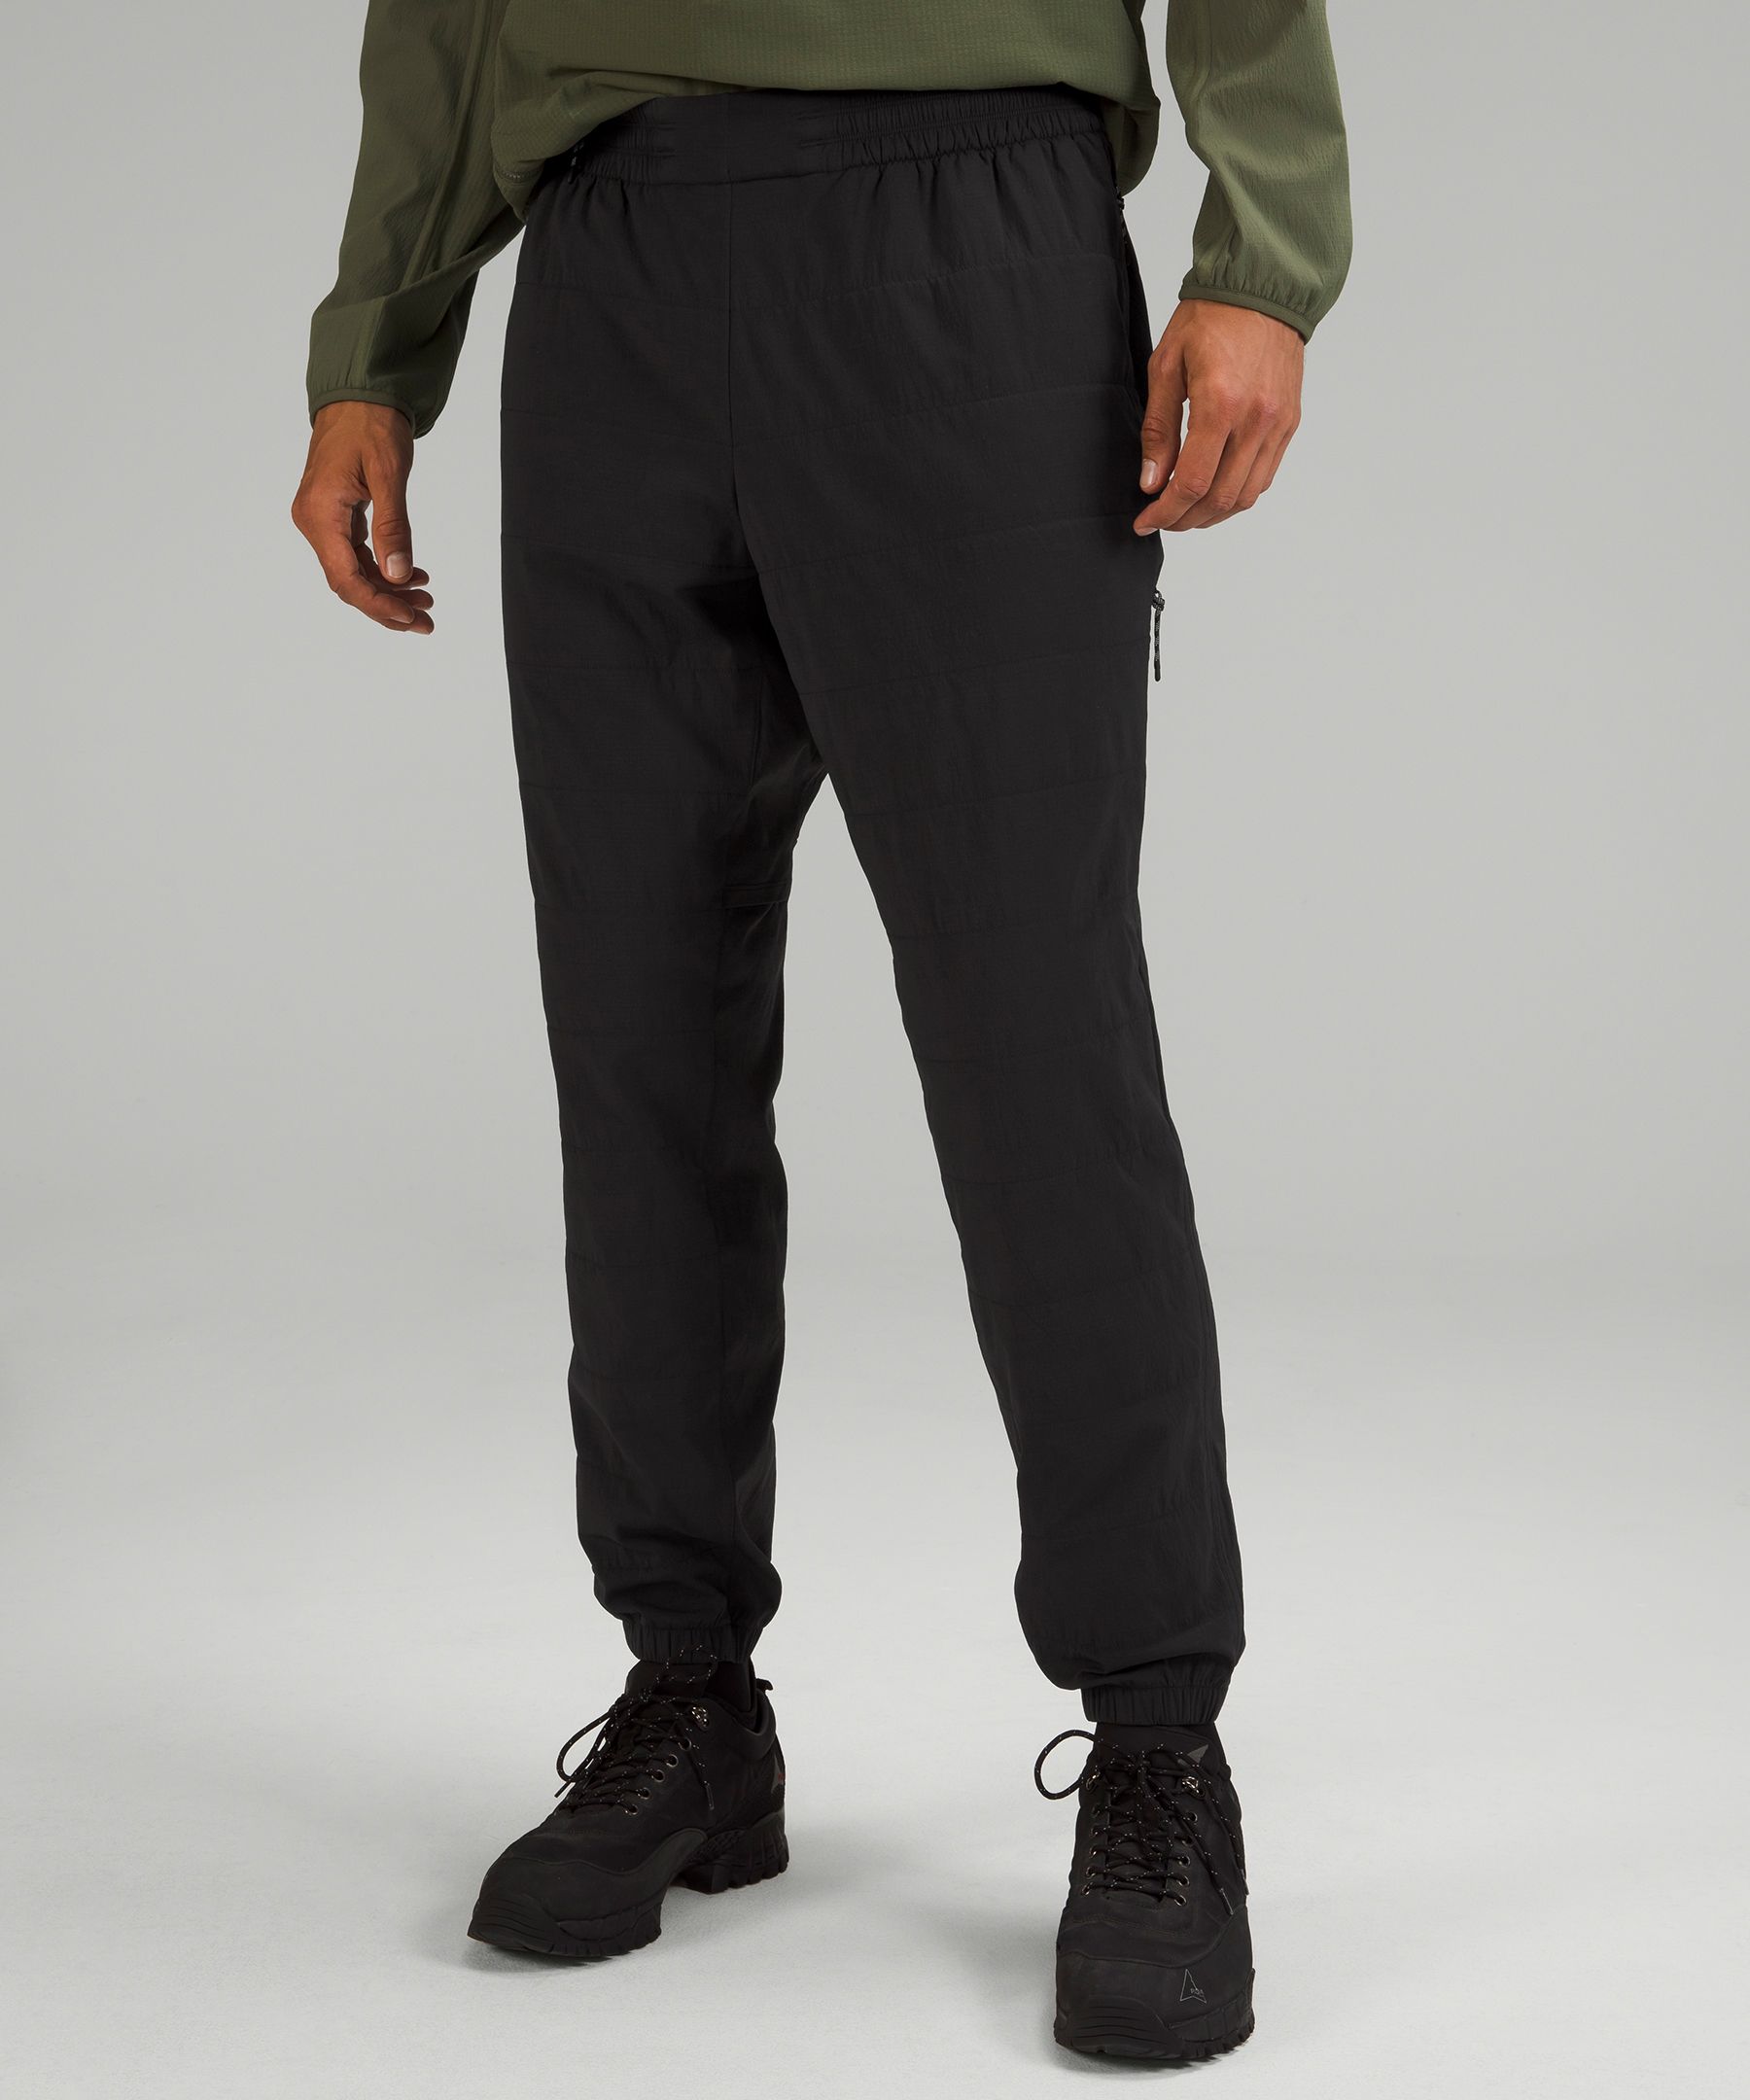 Lululemon athletica Insulated Hiking Pant, Men's Joggers